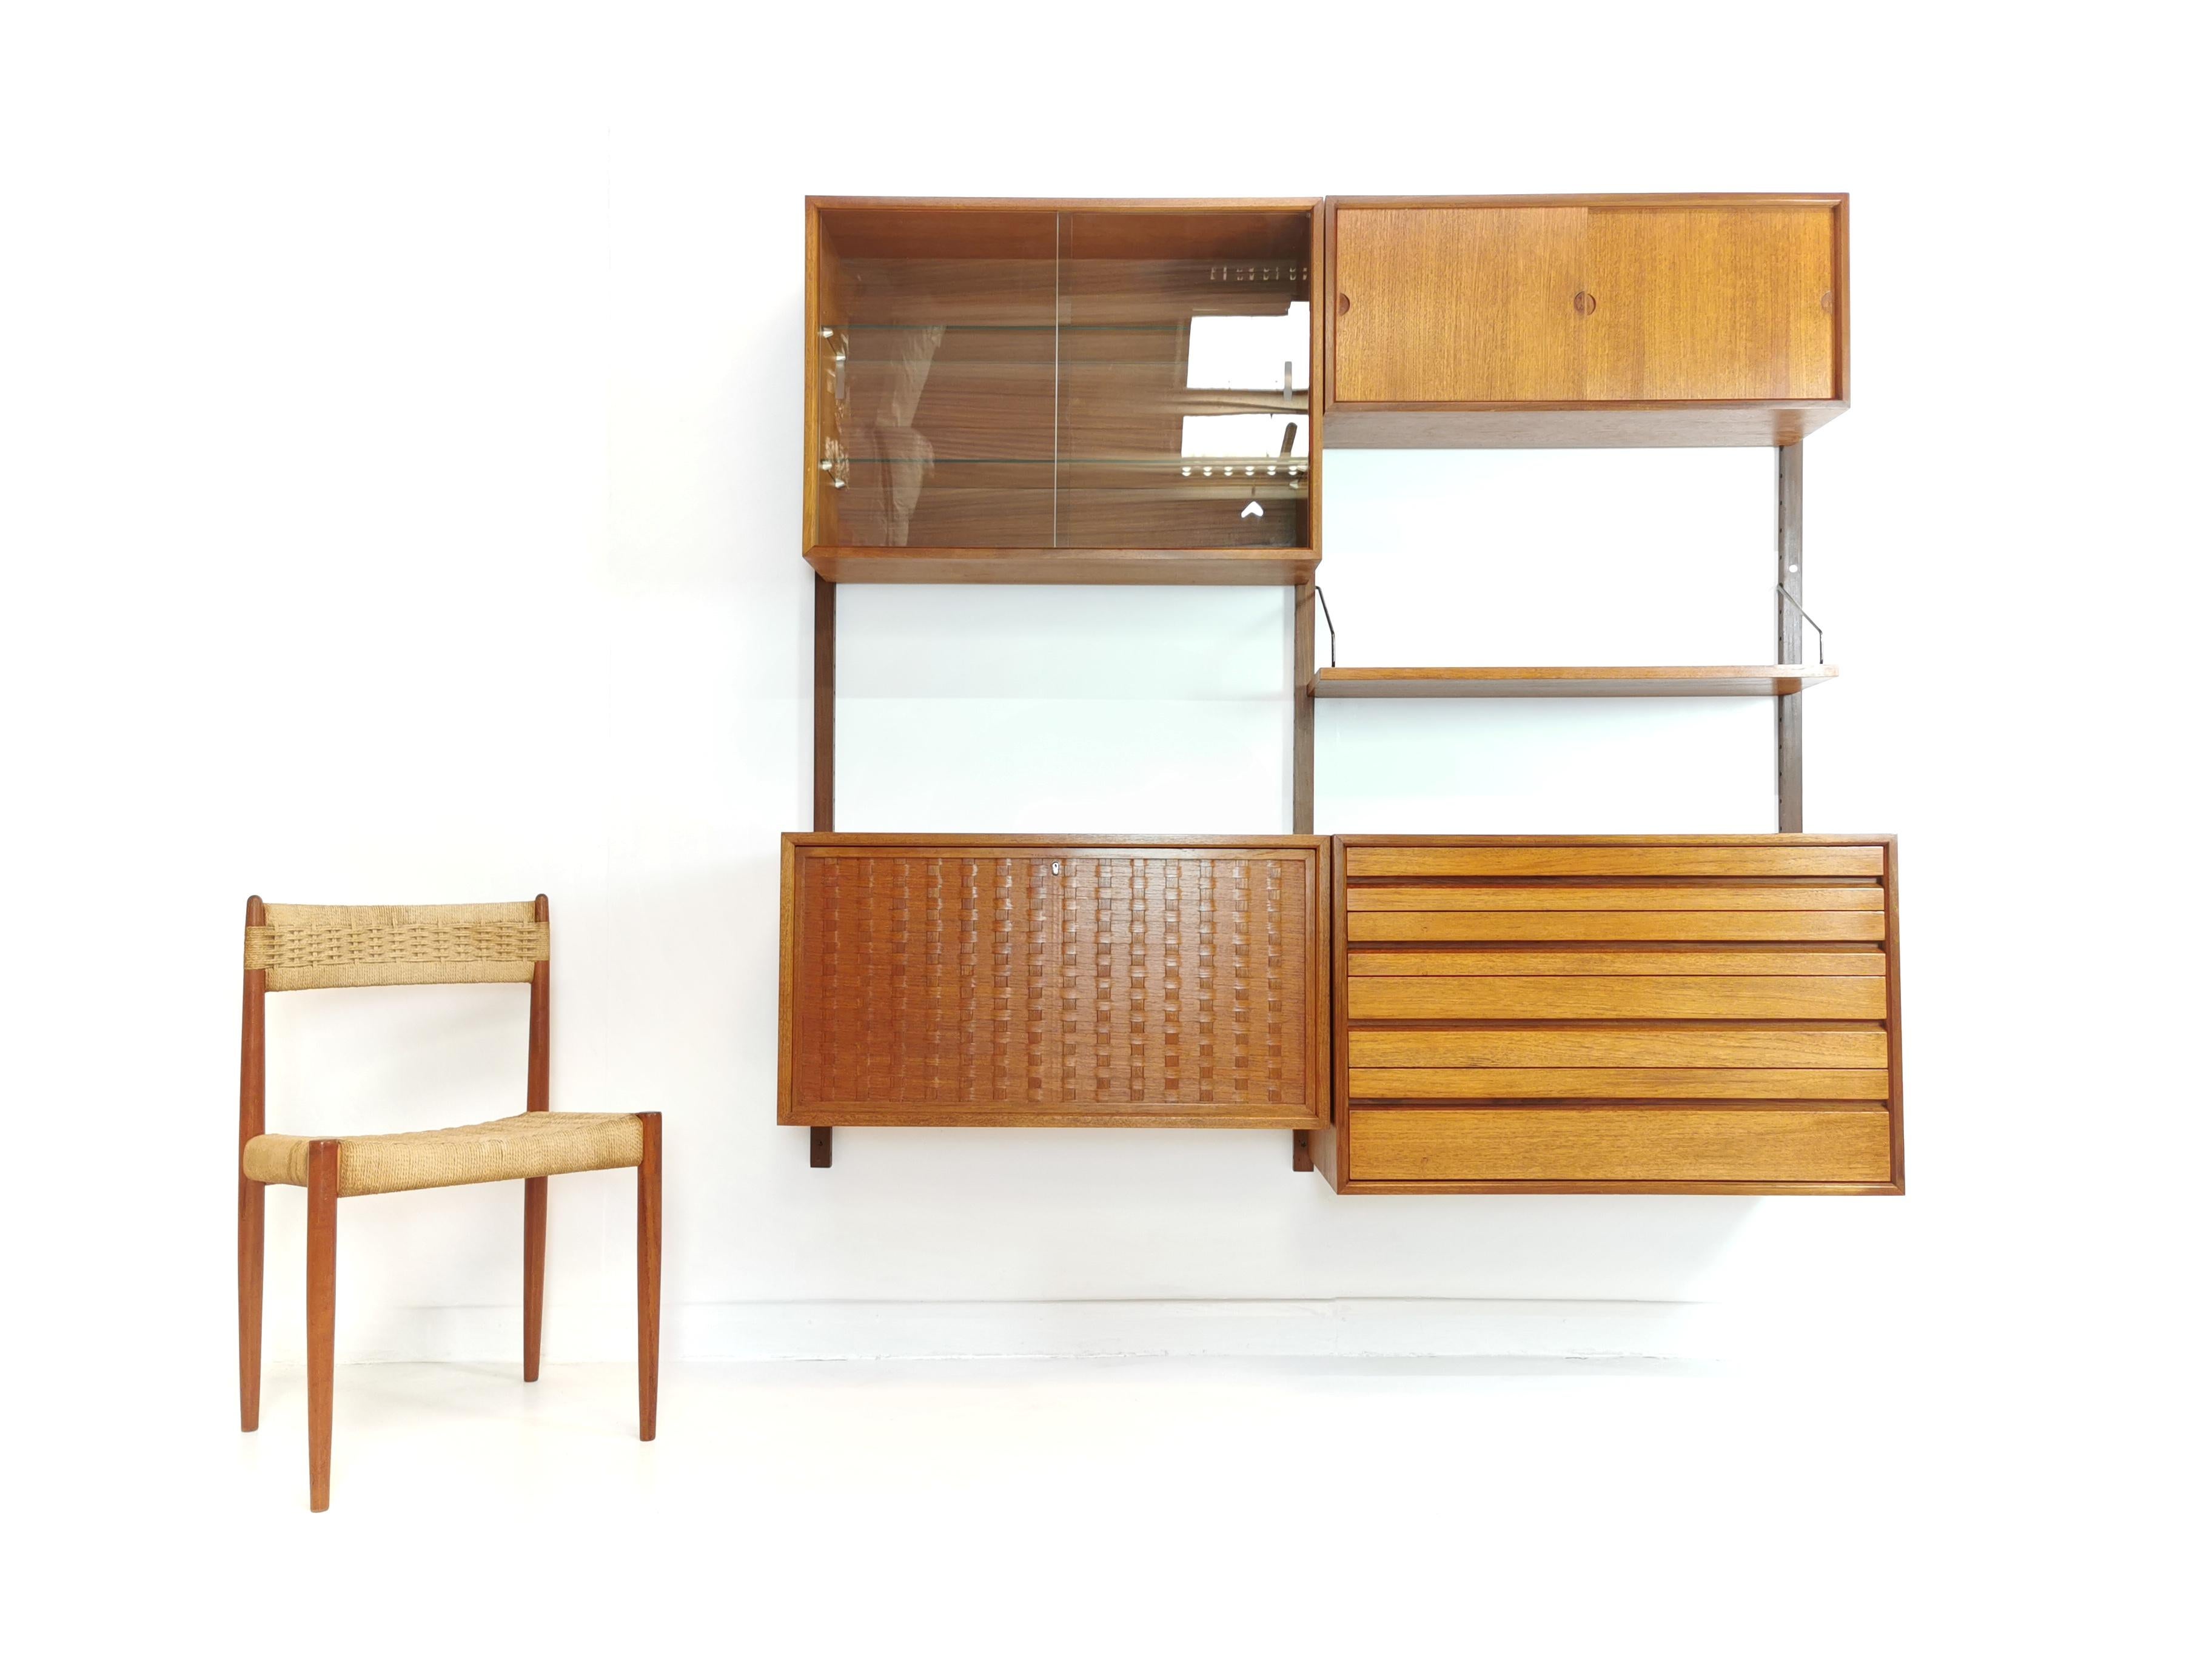 Poul Cadovius wall unit.

1960s, Danish, in teak.

Midcentury teak wall unit designed by Poul Cadovius for Cado, Demark.

The system features a sliding door glass-fronted display cabinet, a single shelf, a mirrored drinks cabinet with key,